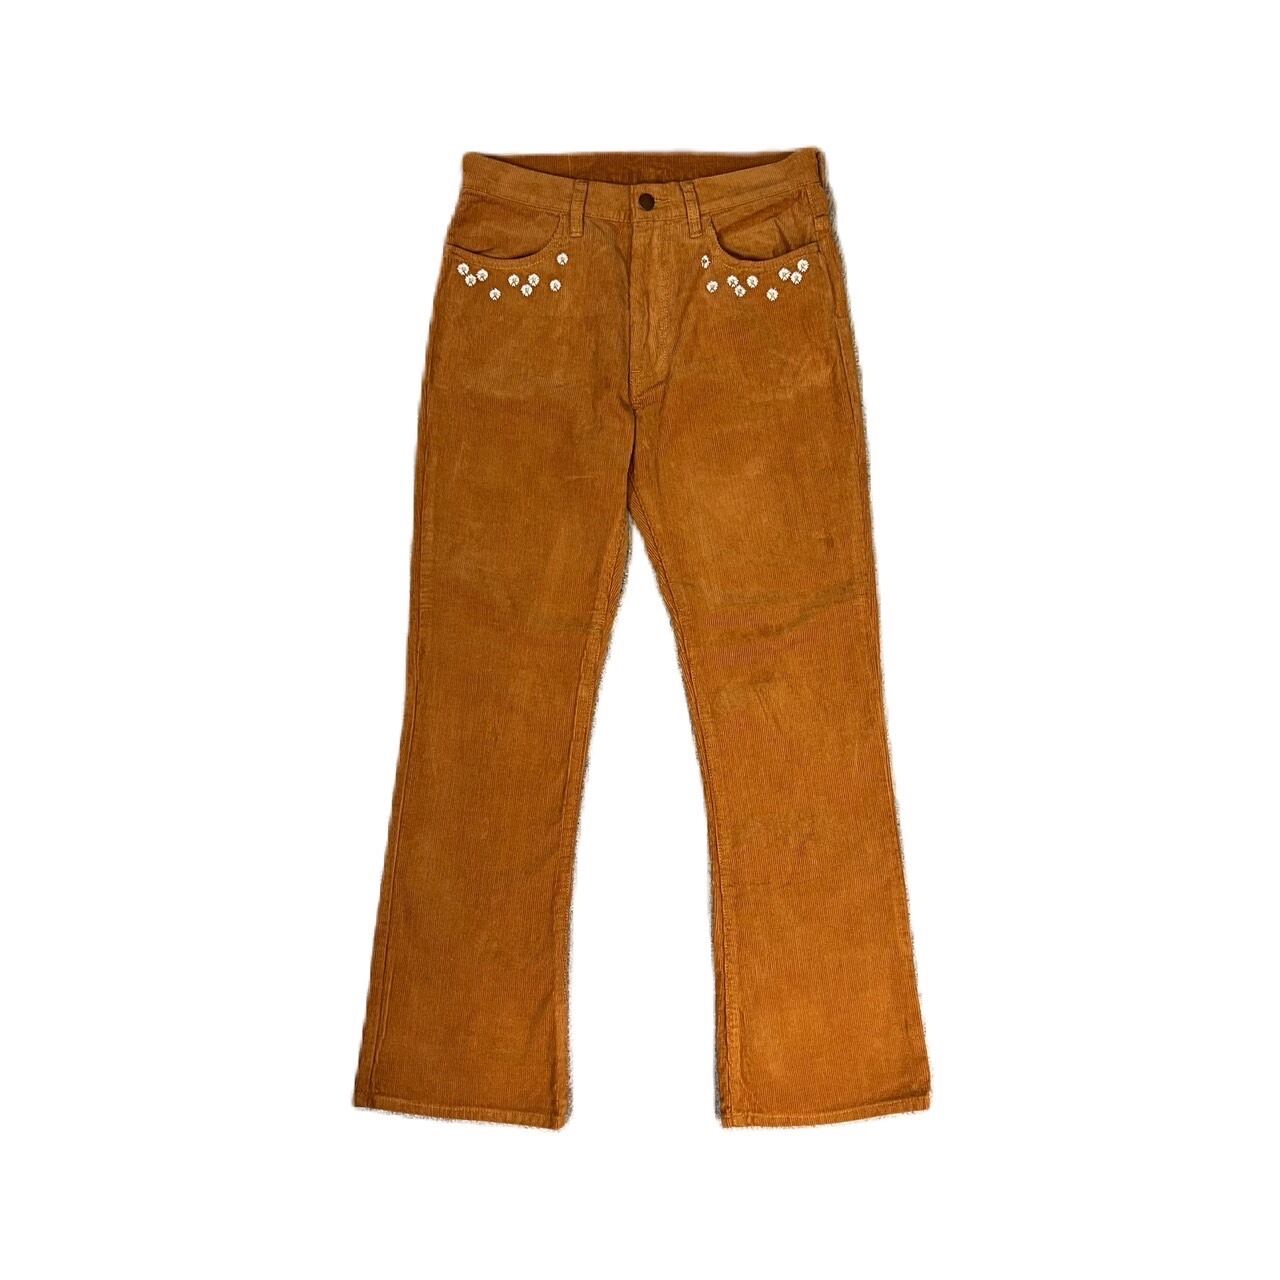 HAVE A GRATEFUL DAY #Flower Cut Embroidery Pants Camel